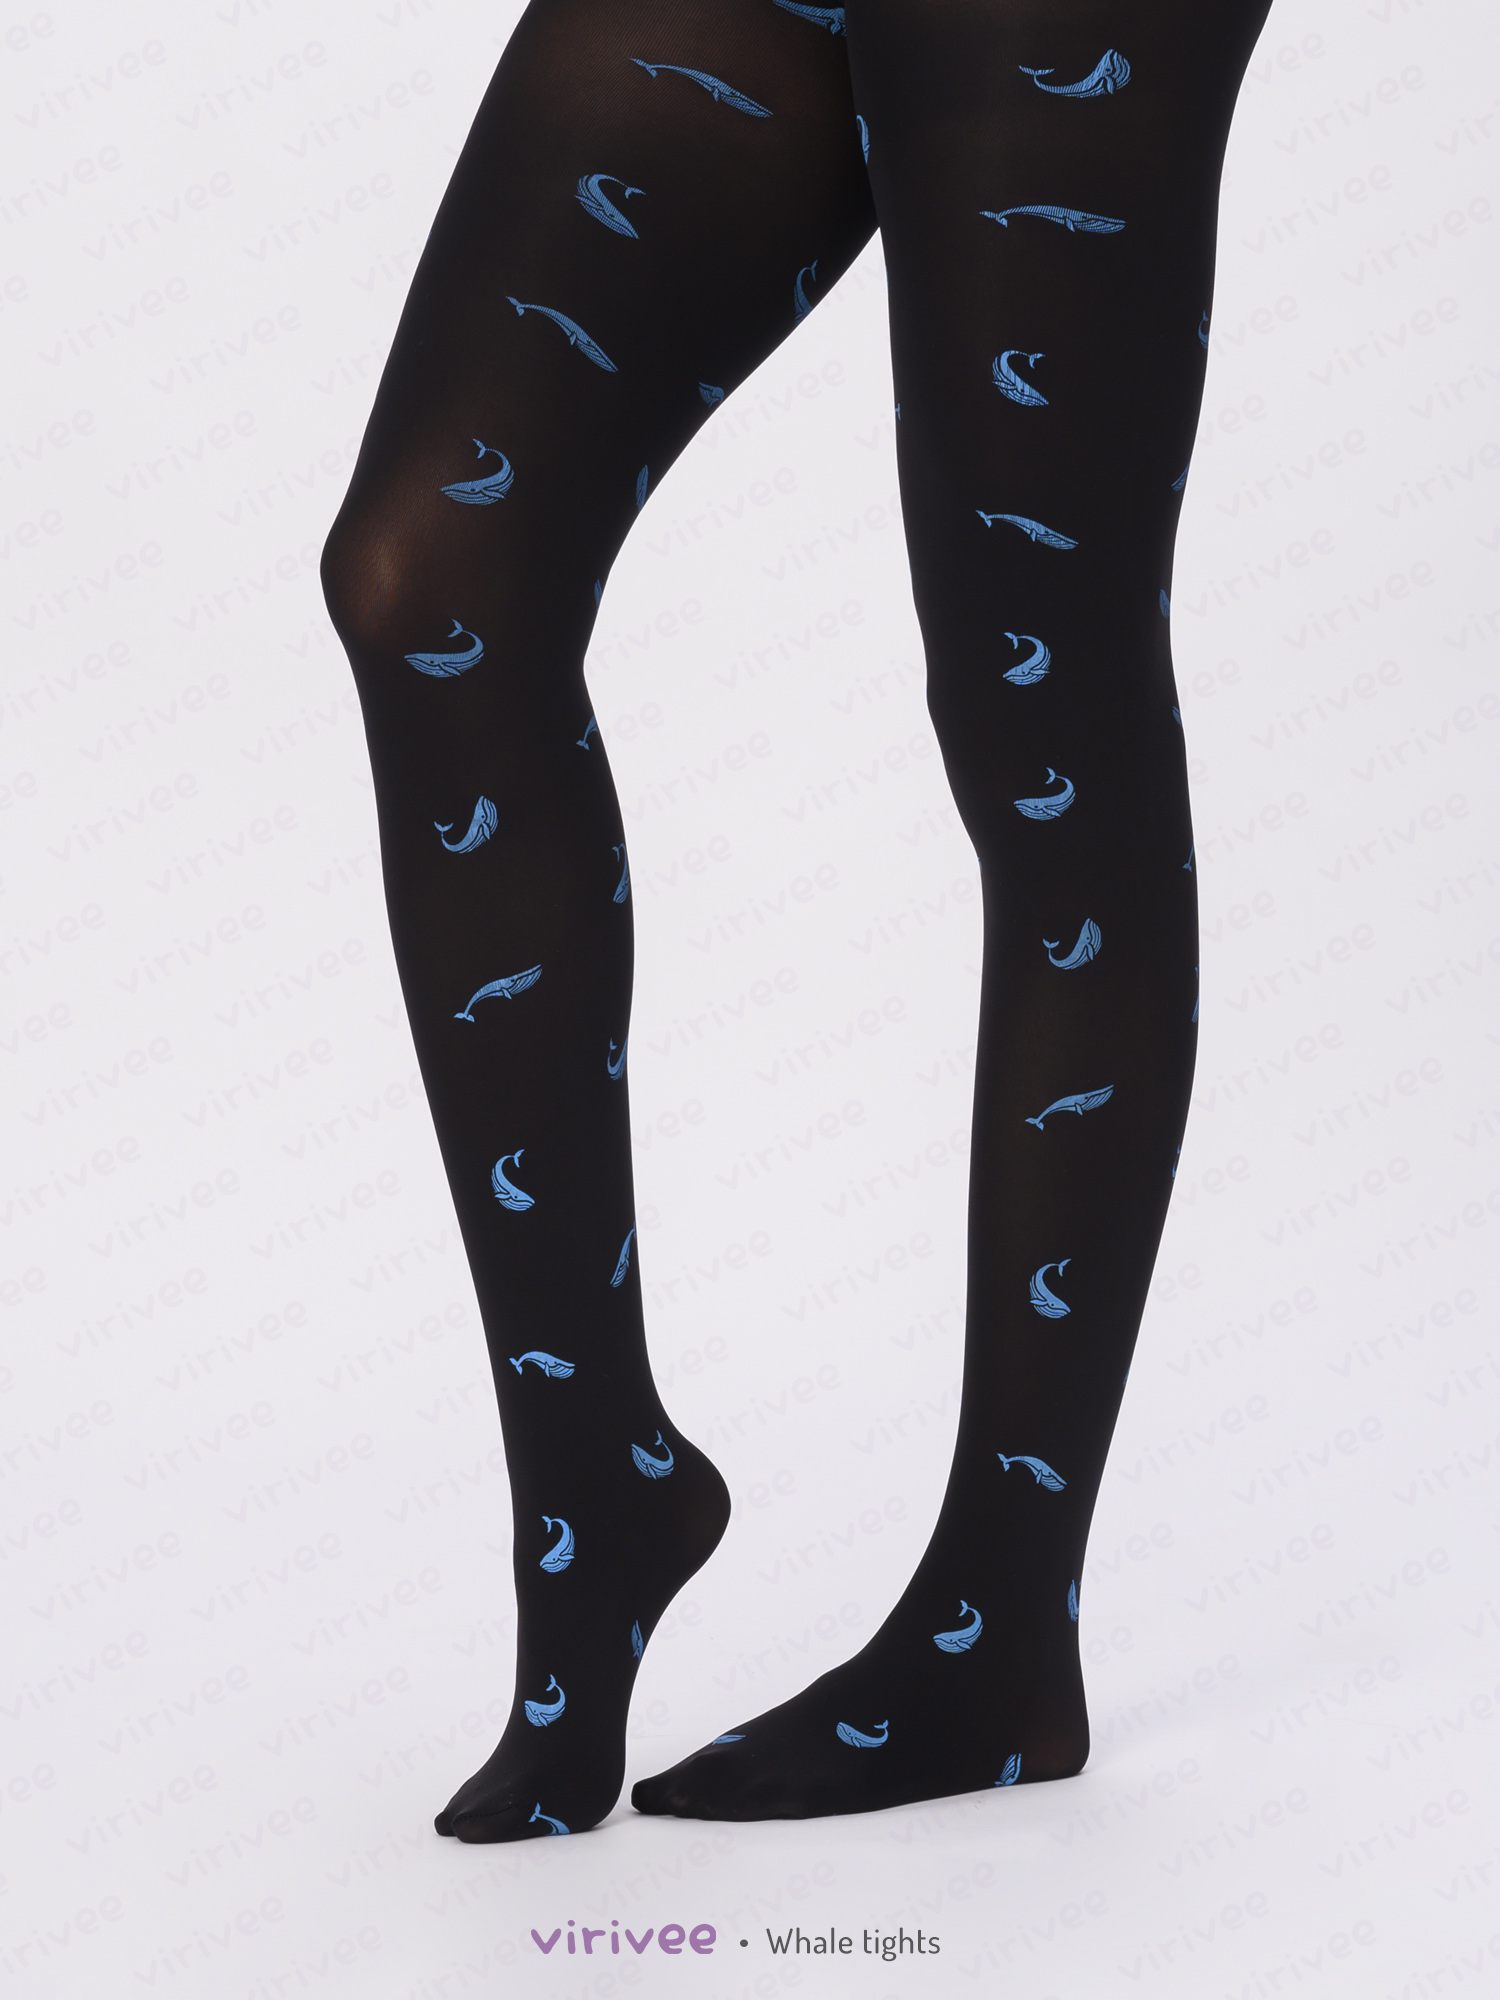 Blue whale tights